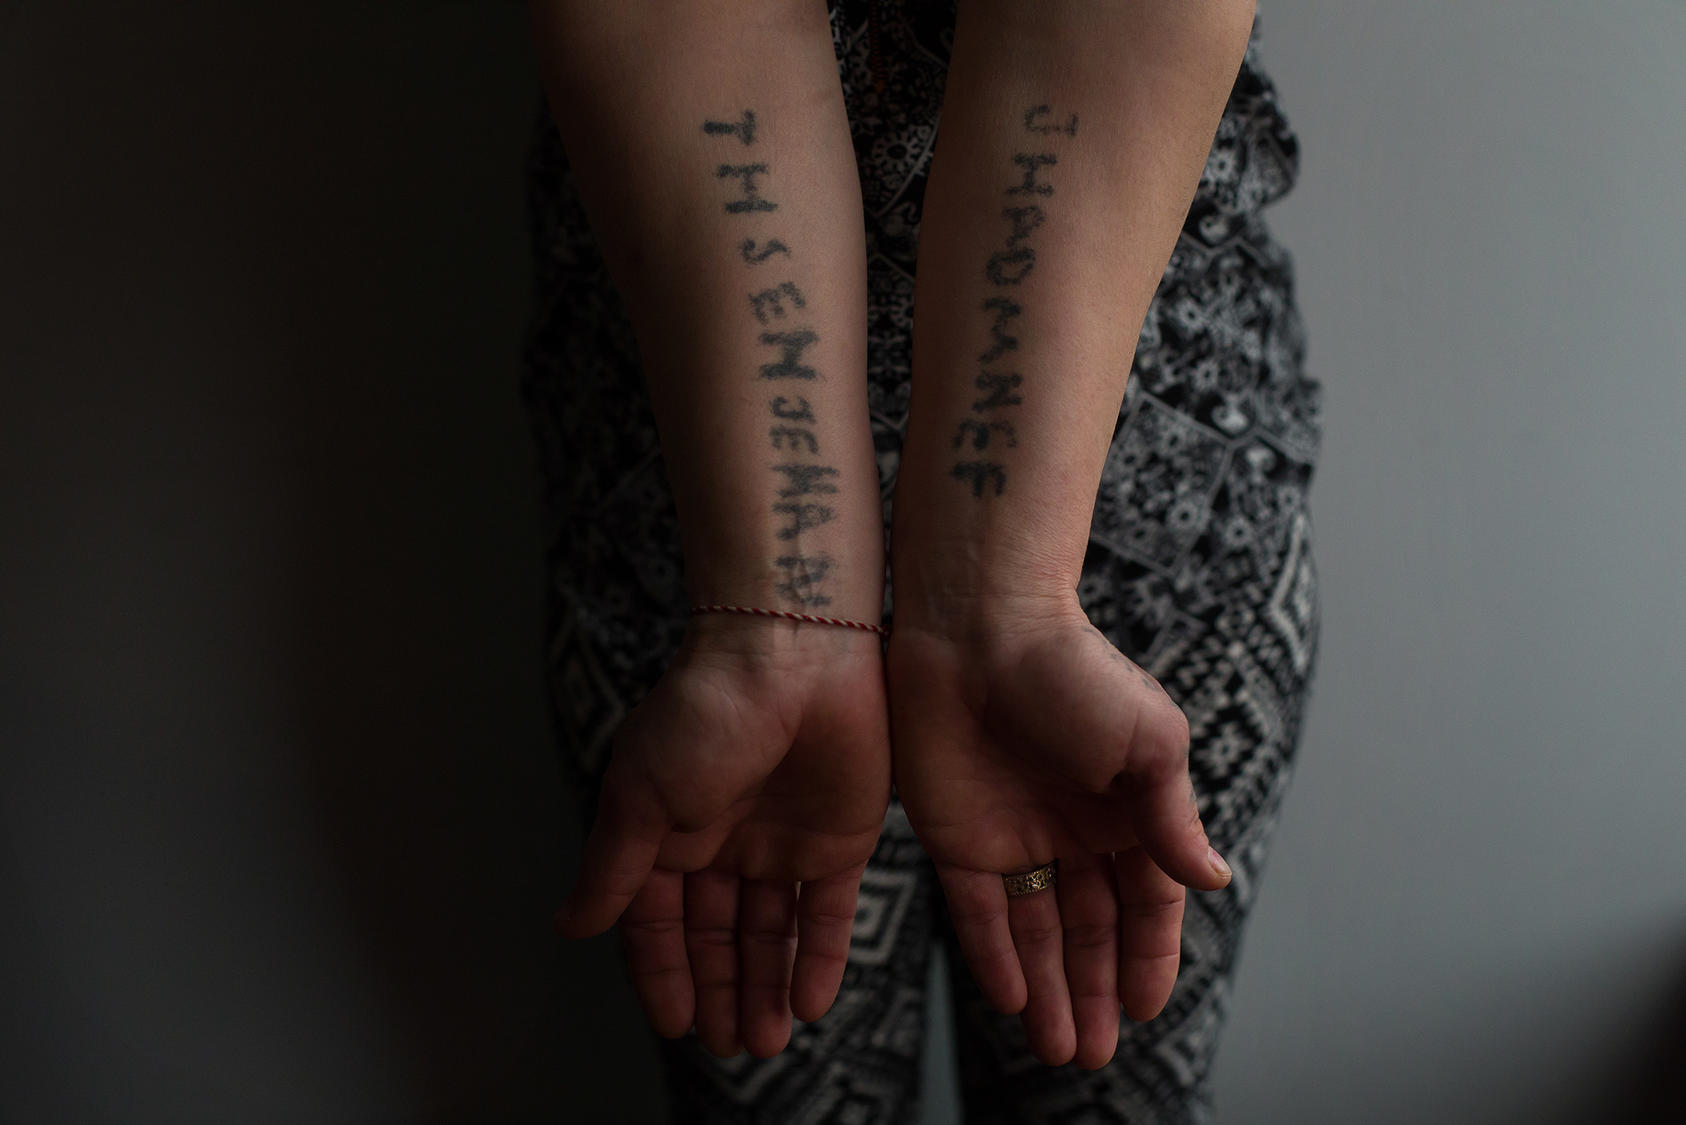 Jihan, a Yazidi seized by ISIS as a sex slave, tattooed relatives’ names onto her body while in captivity. Now a refugee in Canada, Jihan asked that her family name be withheld to protect relatives still held by ISIS. (Amber Bracken/The New York Times)